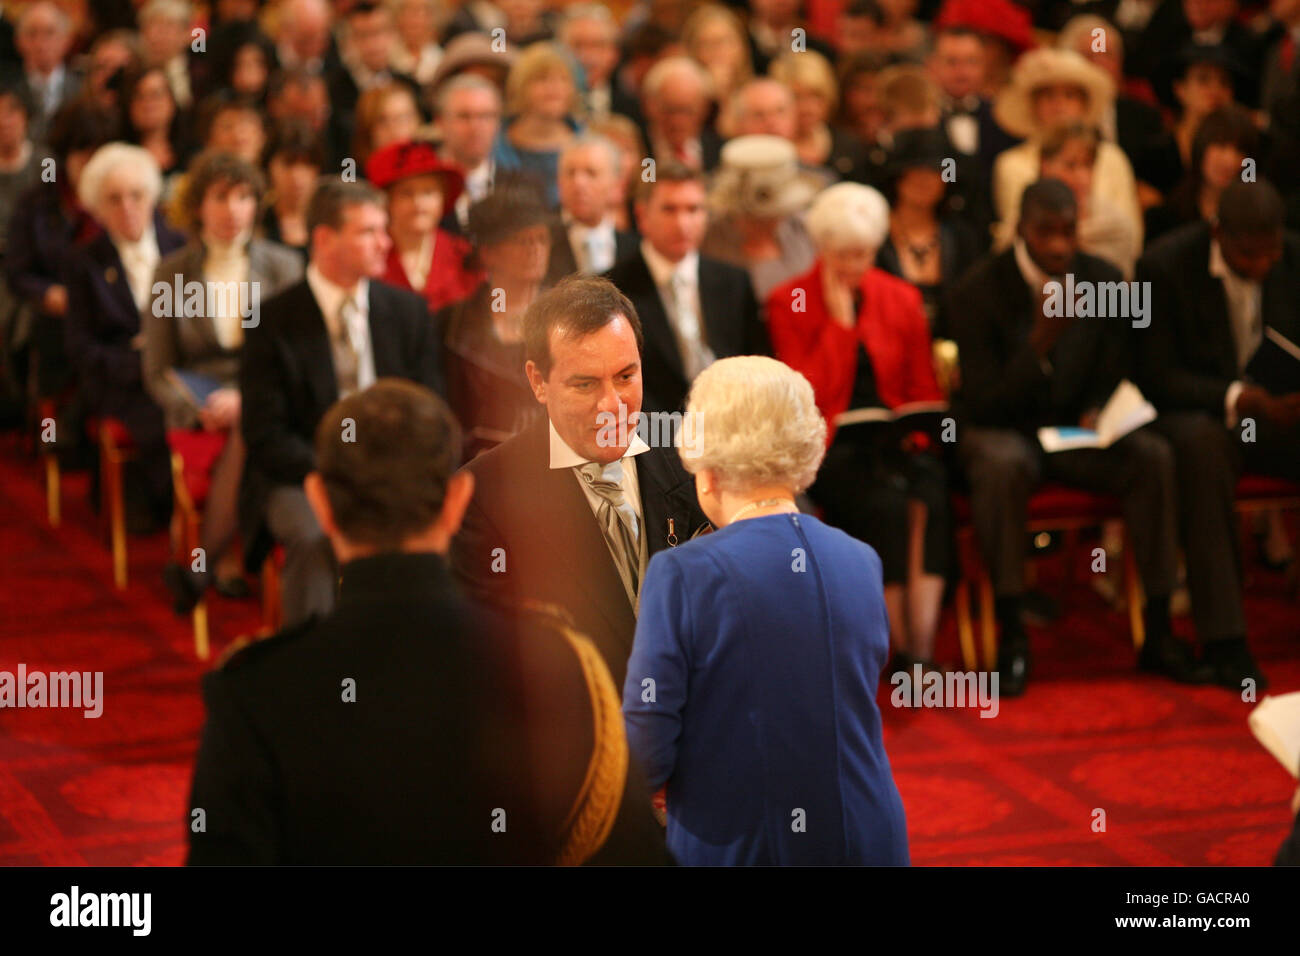 Mr. David Westwood, from Windsor, is made an MVO by The Queen at Buckingham Palace. Stock Photo